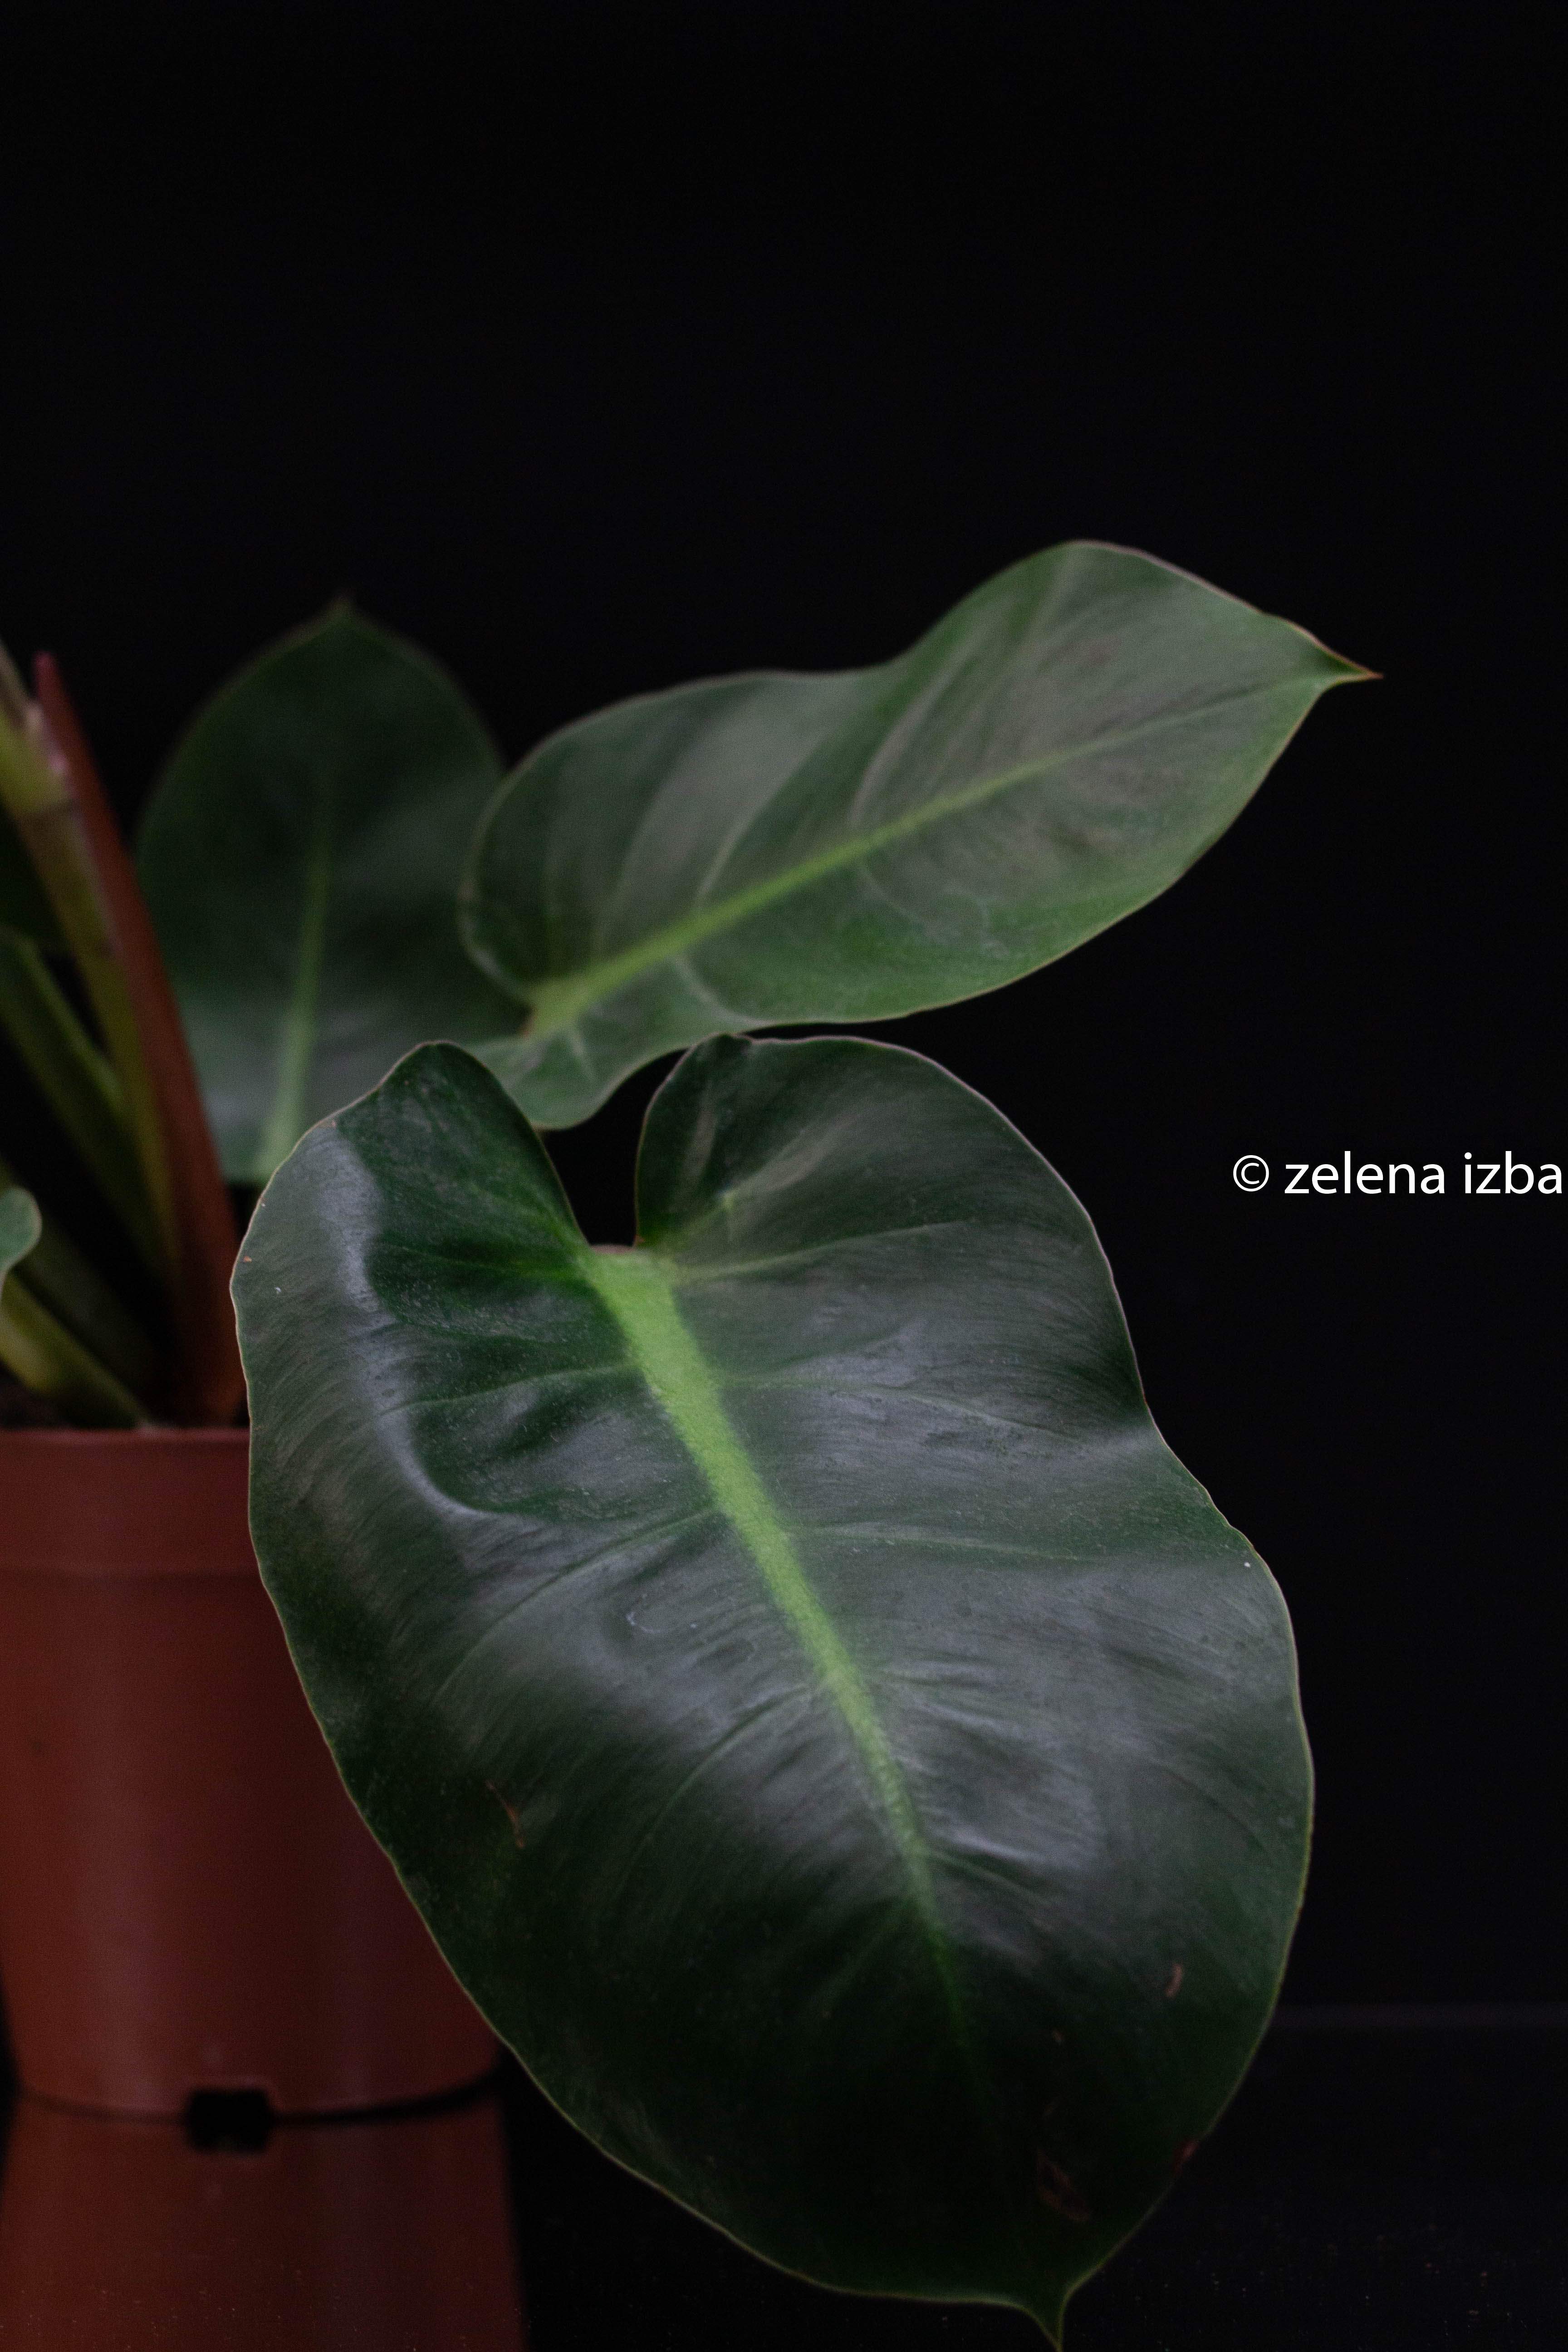 Philodendron new melinonii "L"